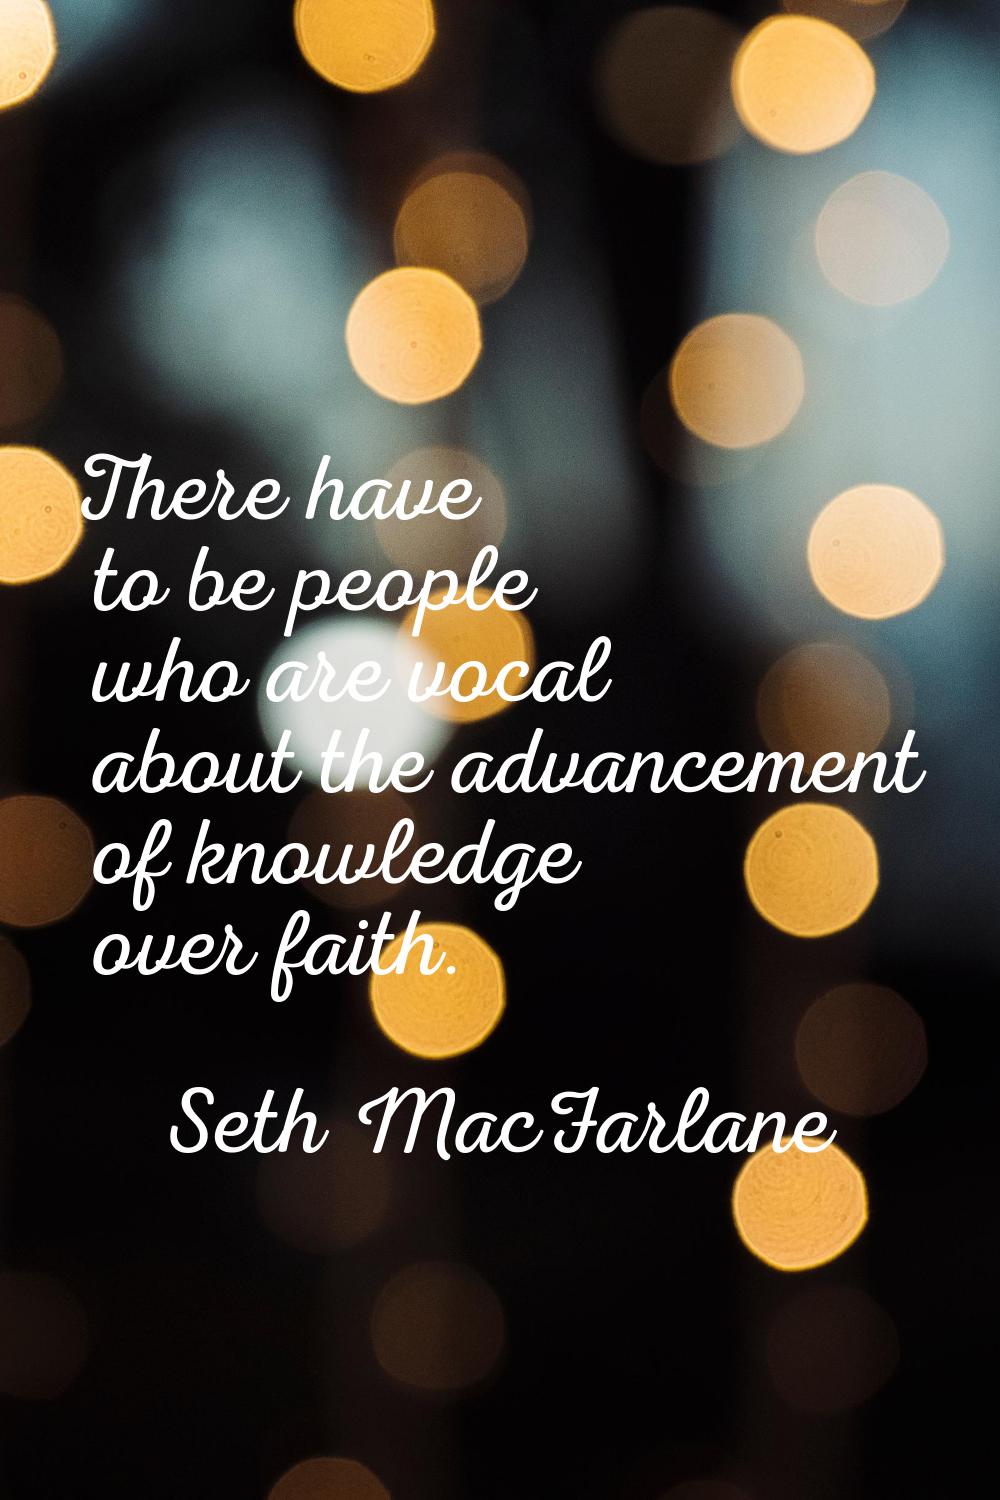 There have to be people who are vocal about the advancement of knowledge over faith.